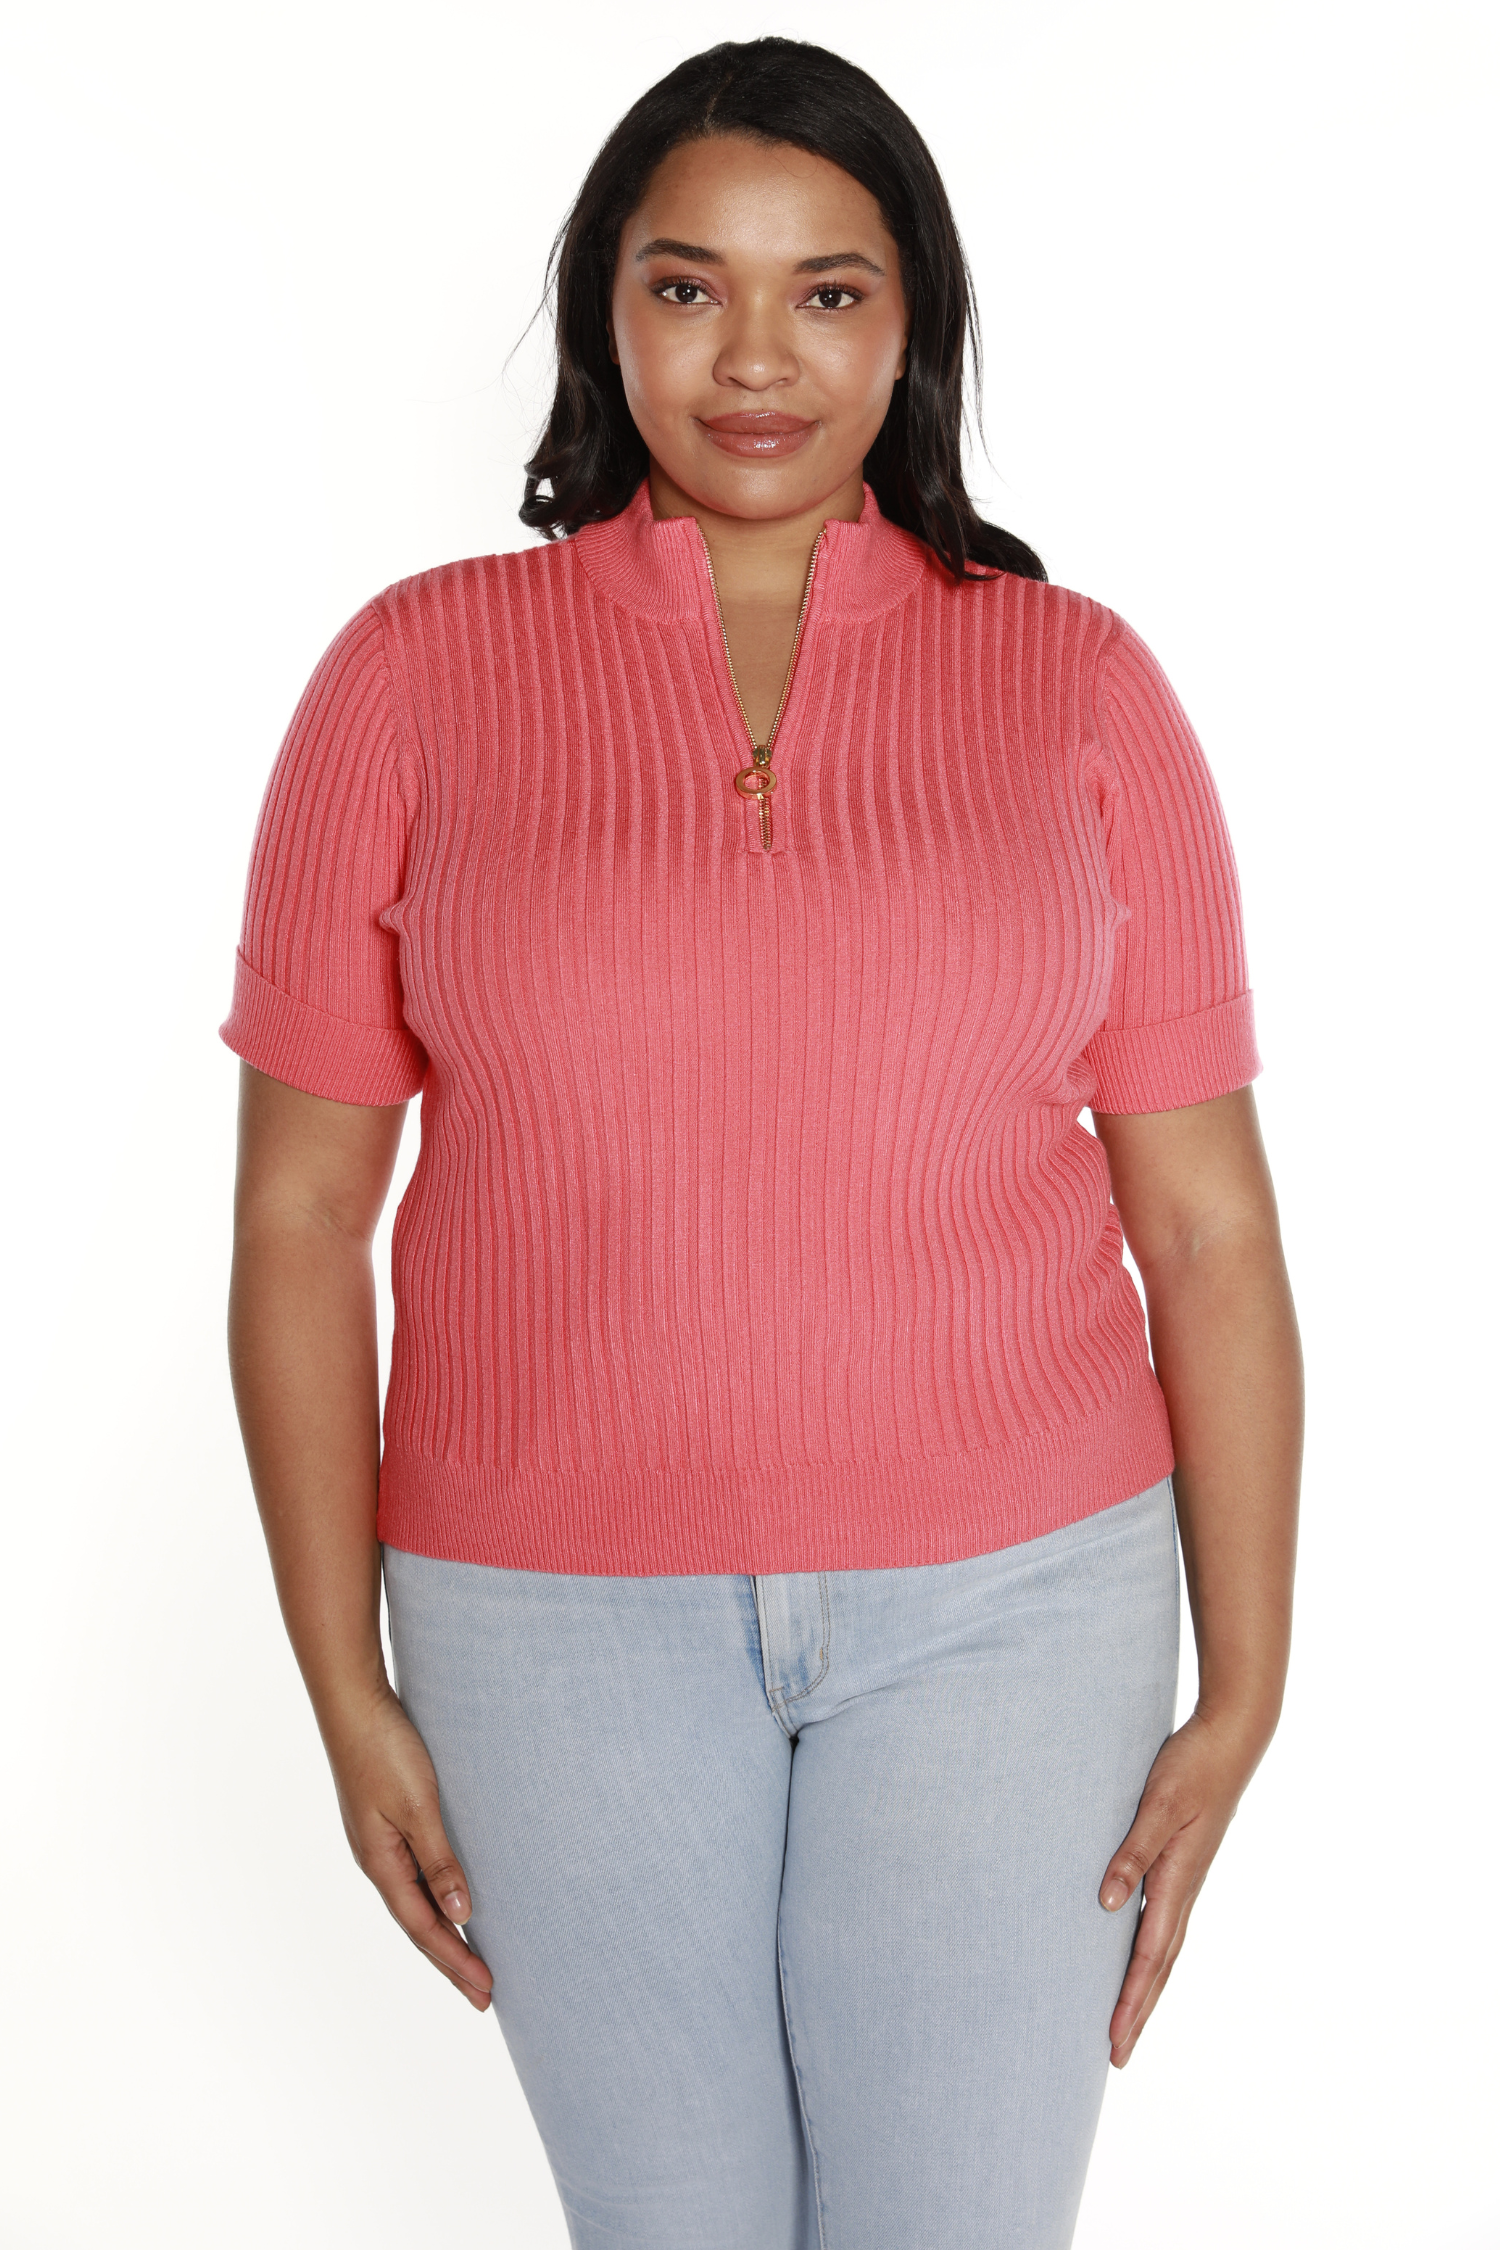 NEW COLORS Women's Pullover Sweater Top with Front Quarter Zip in a Ribbed Knit | Curvy